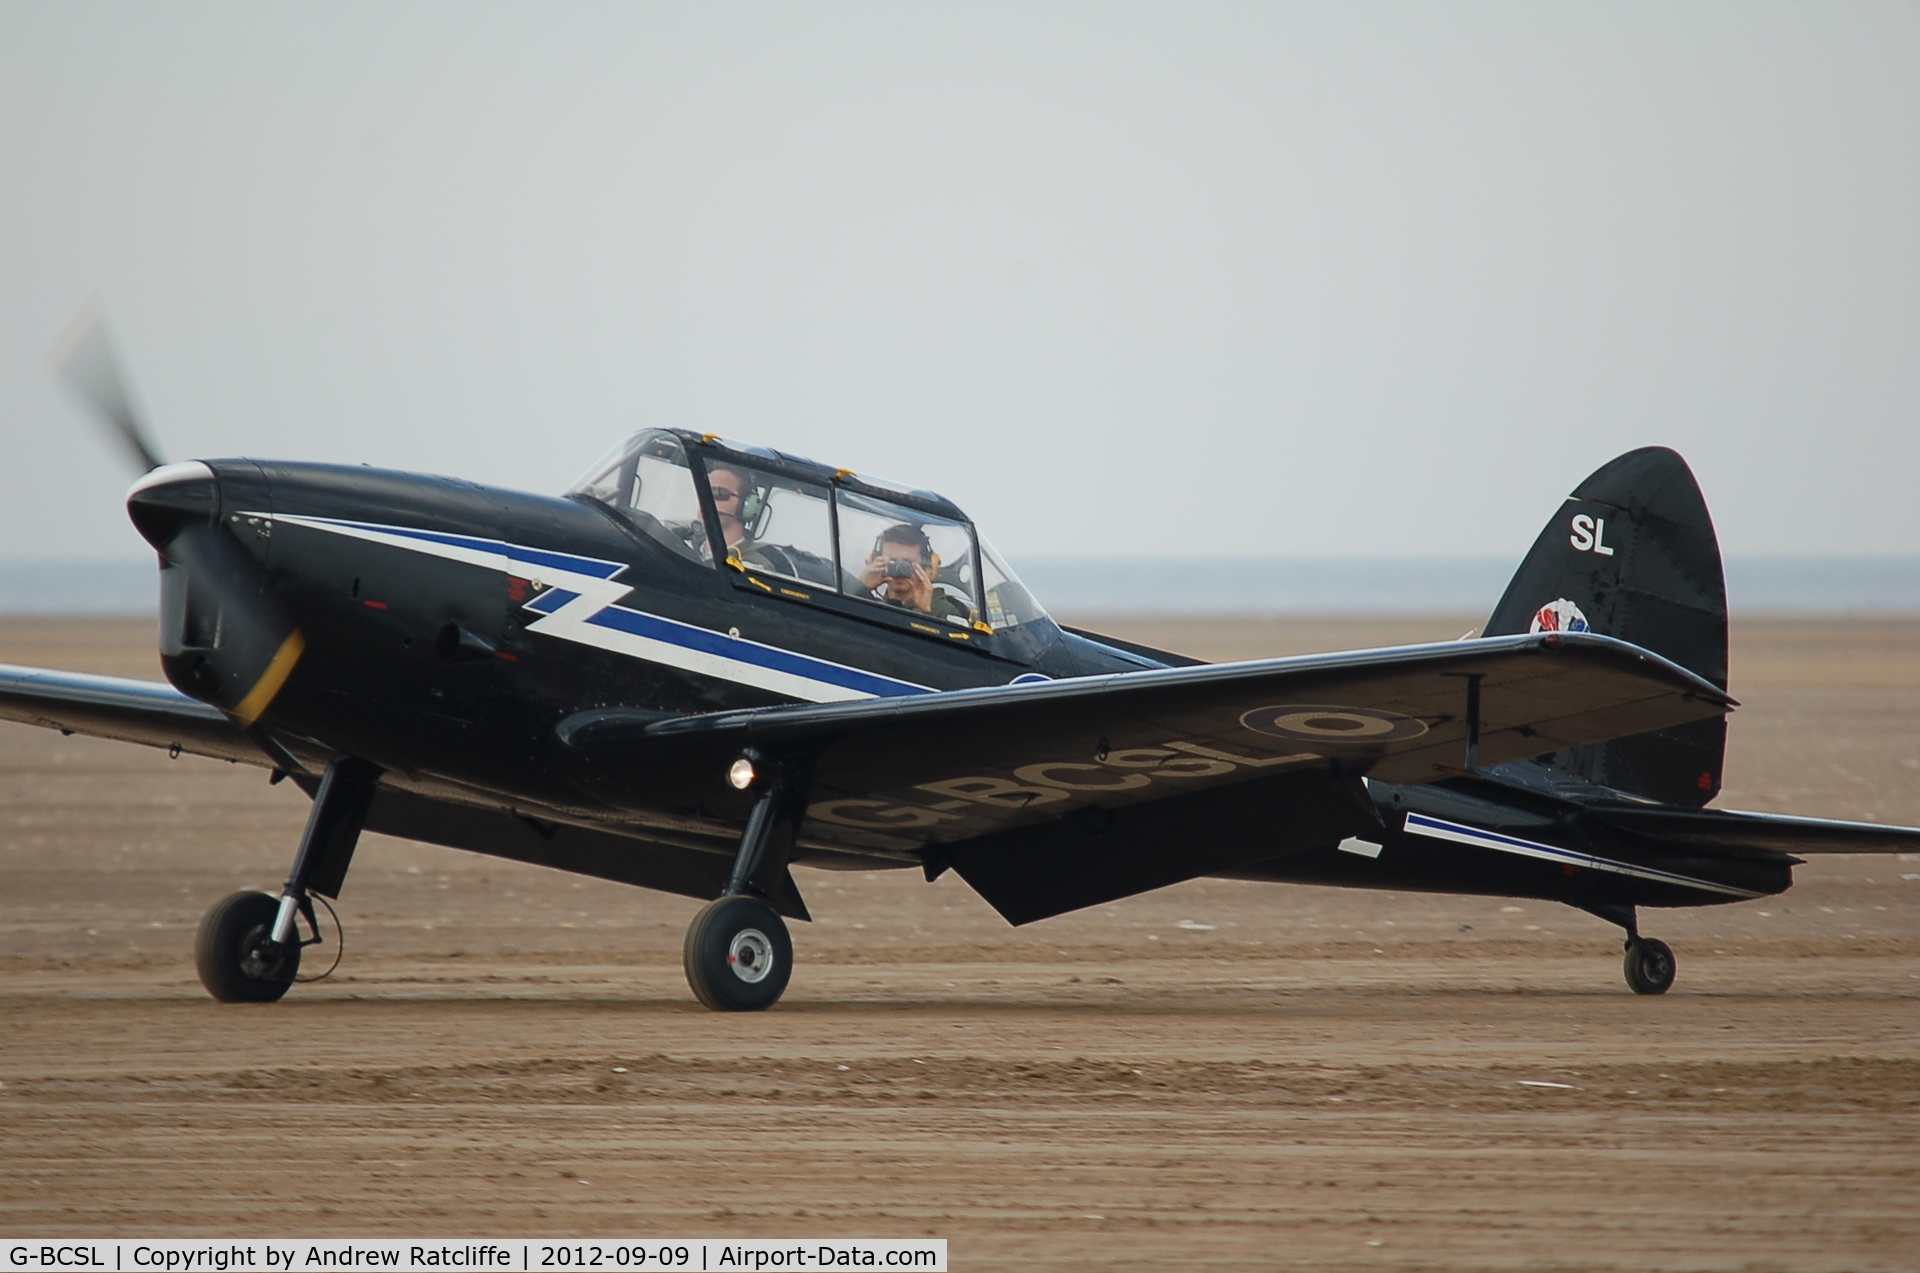 G-BCSL, 1951 De Havilland DHC-1 Chipmunk 22 C/N C1/0524, Arriving for Static Display on the beach at Southport Airshow 2012